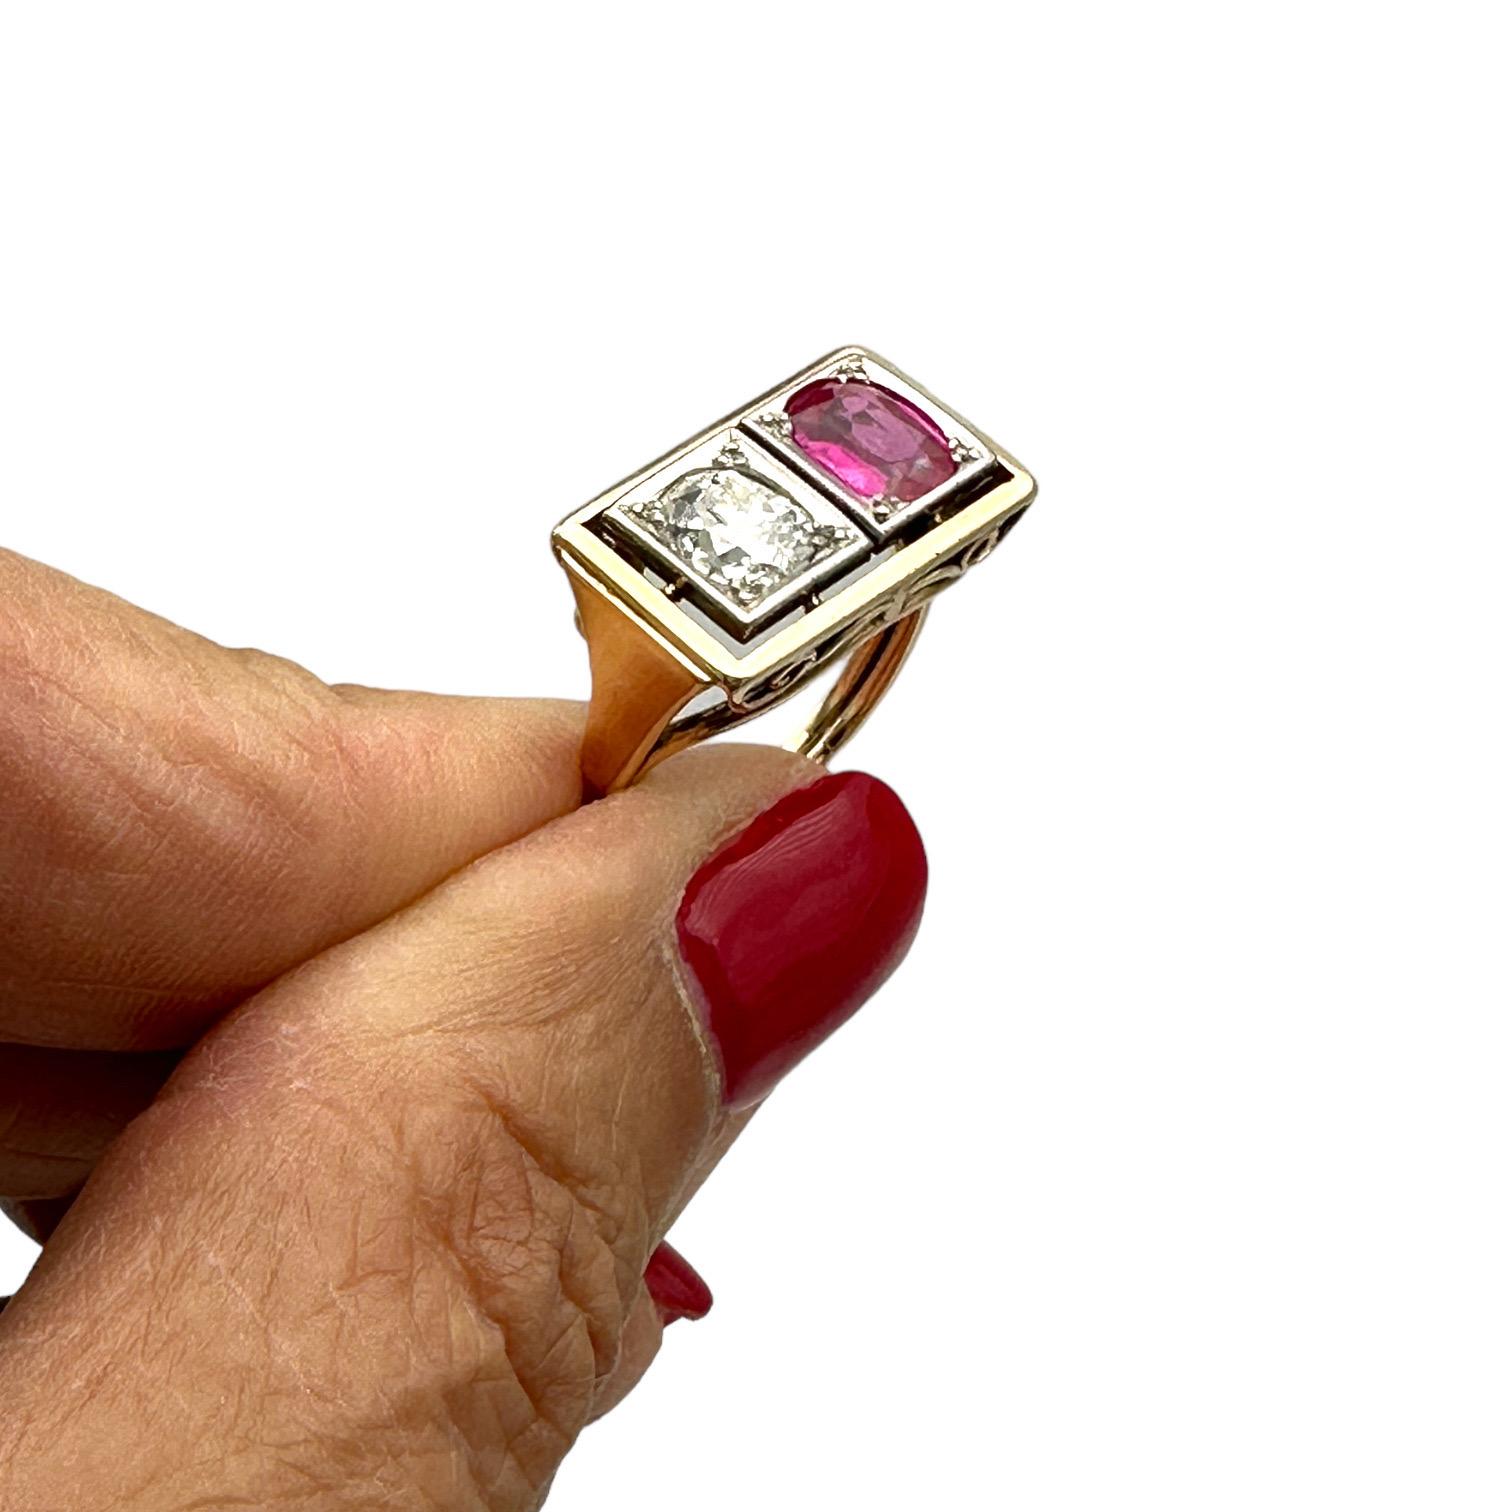 1800's Art Deco Old Miners Cut Diamond & Ruby 2.20 Carat Ring For Sale 2